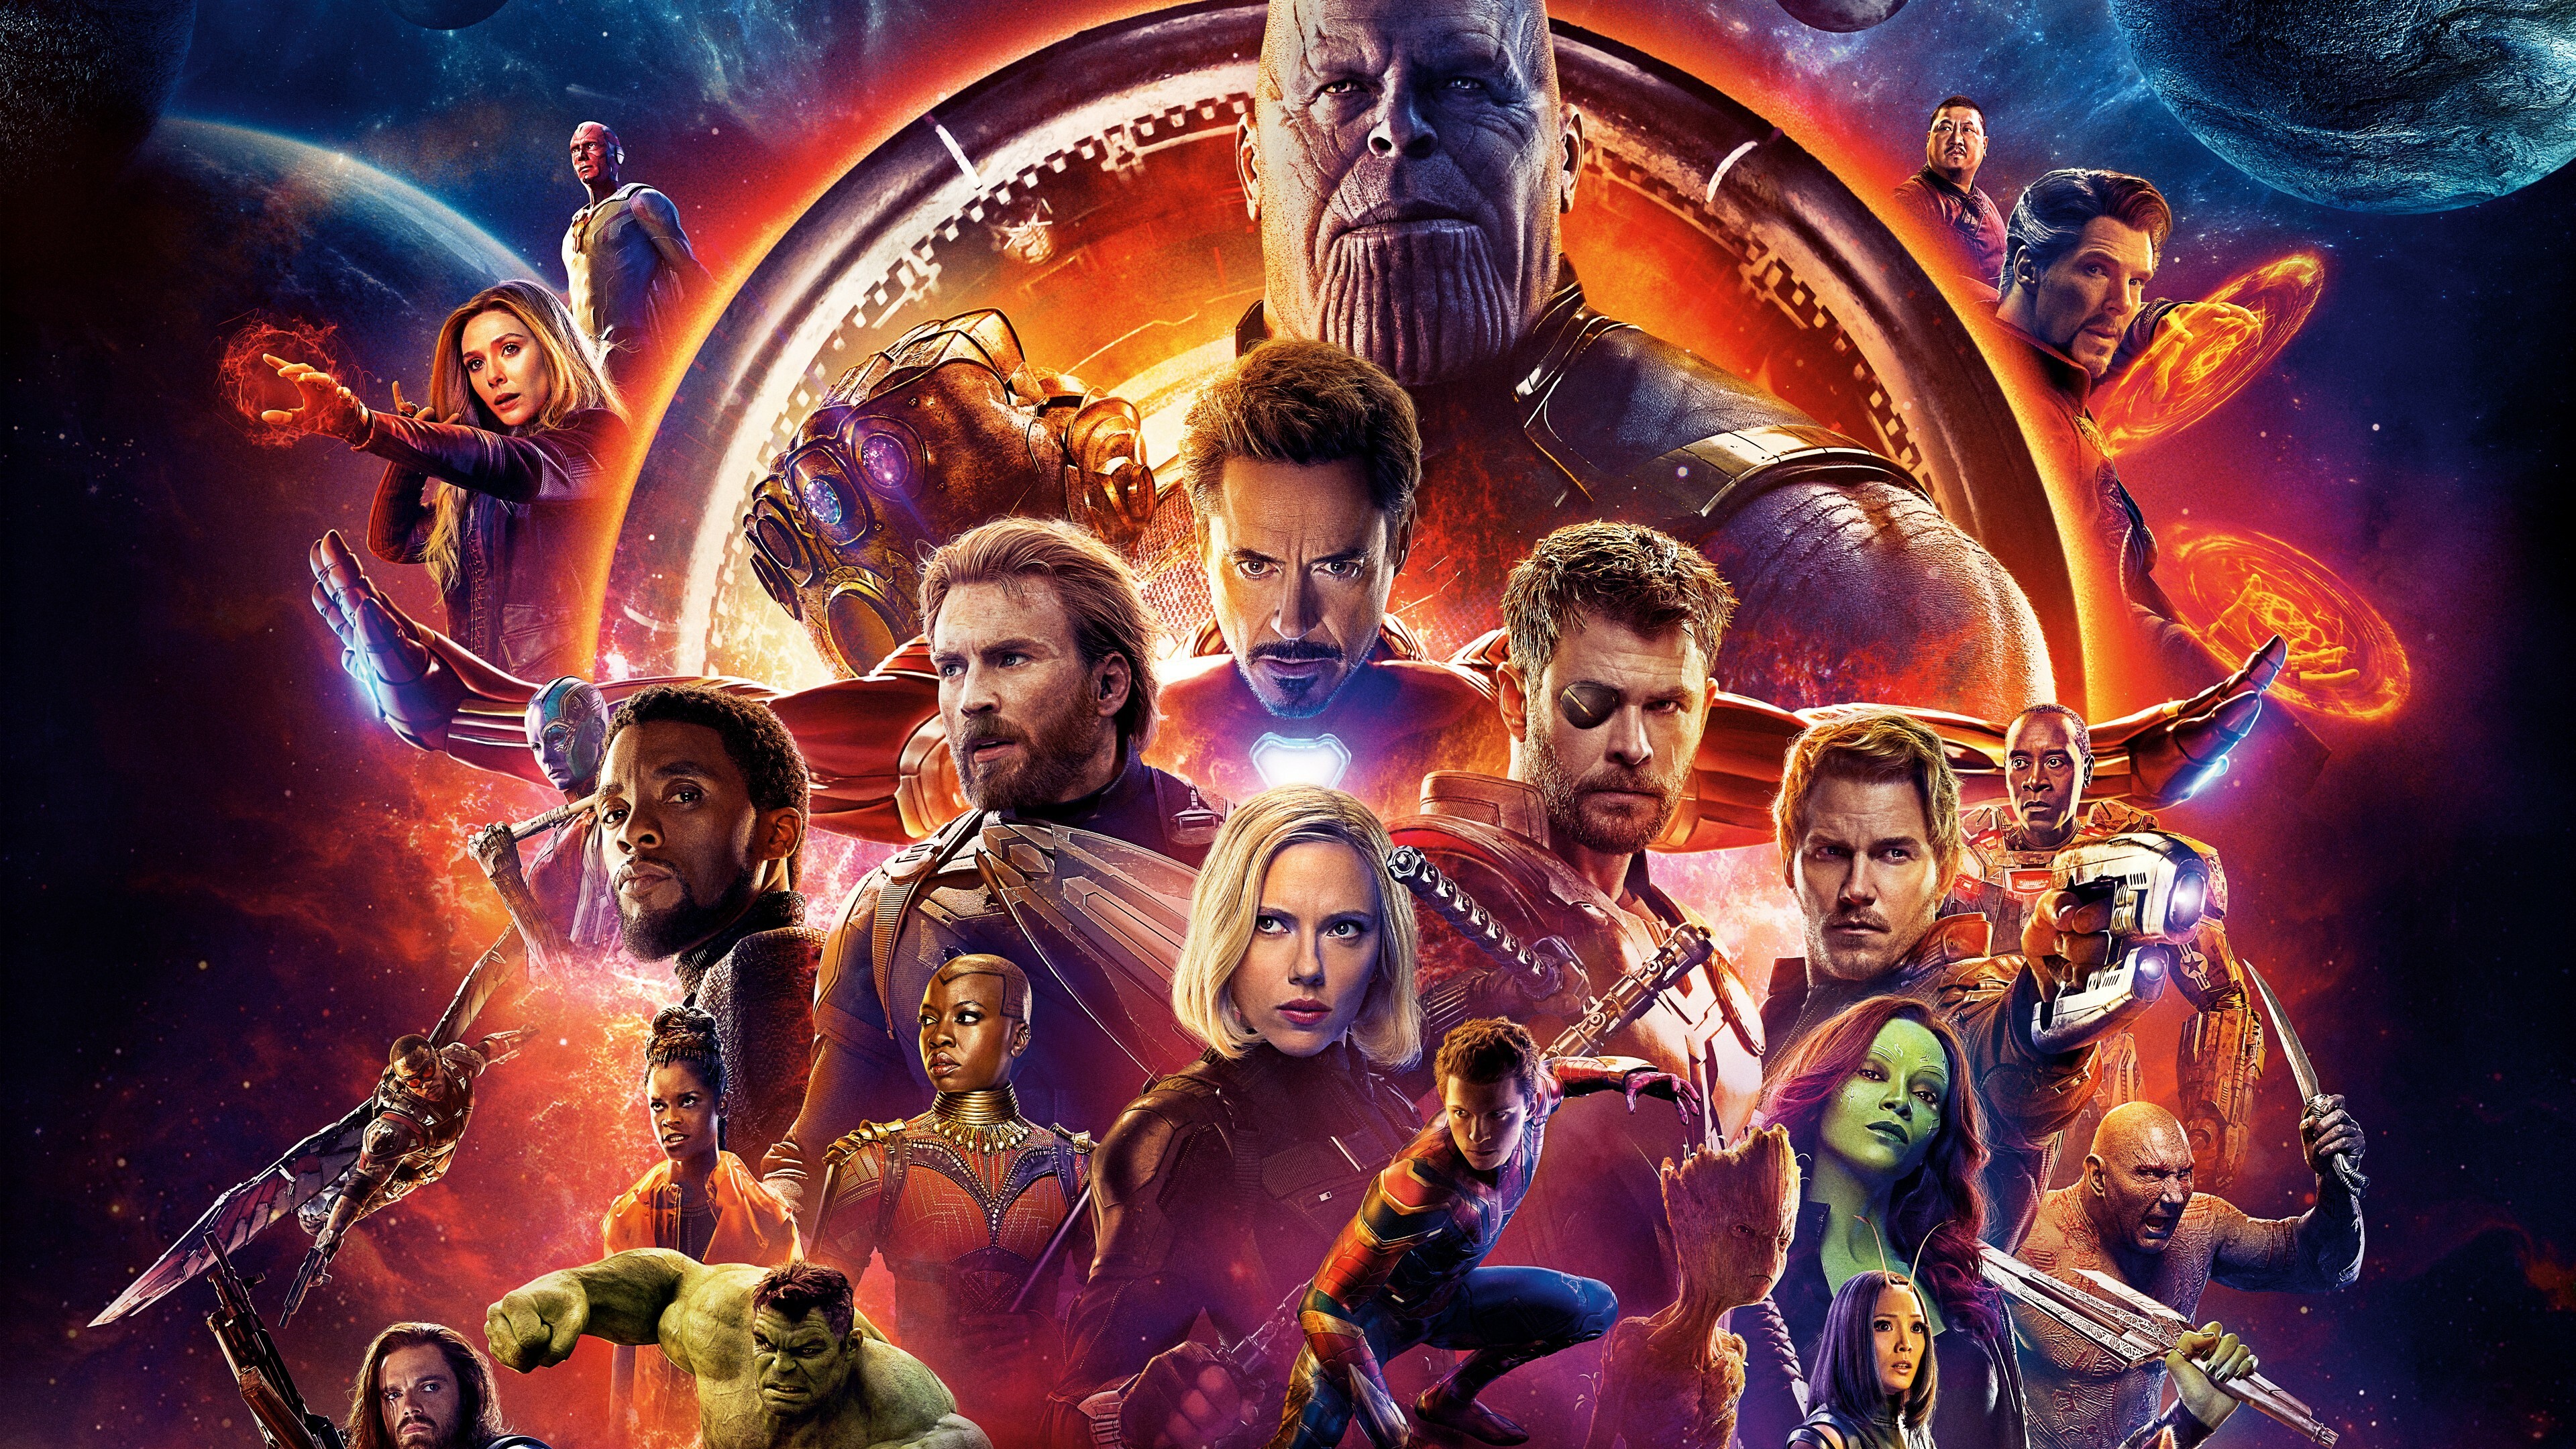 Avengers: The team plays a central role in the Marvel Cinematic Universe's Infinity Saga, being the focus in multiple feature films, beginning with the eponymous 2012 live-action film. 3840x2160 4K Wallpaper.